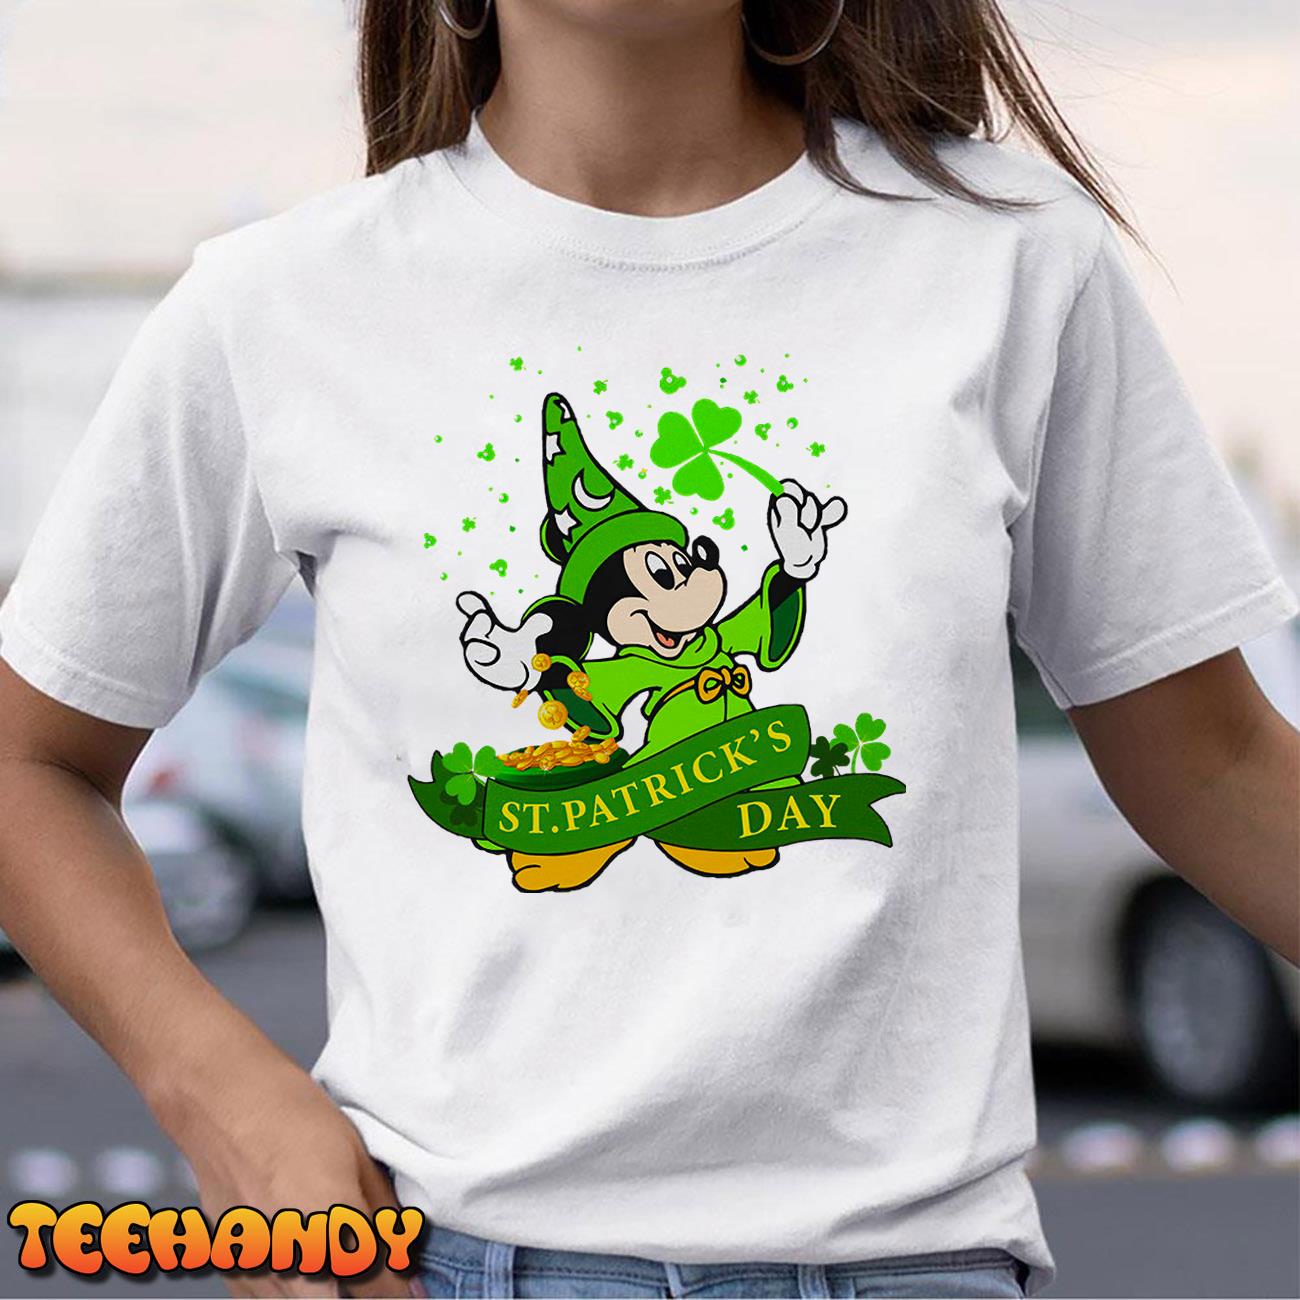 St-patrick’s-Day Mickey Mouse T-Shirt